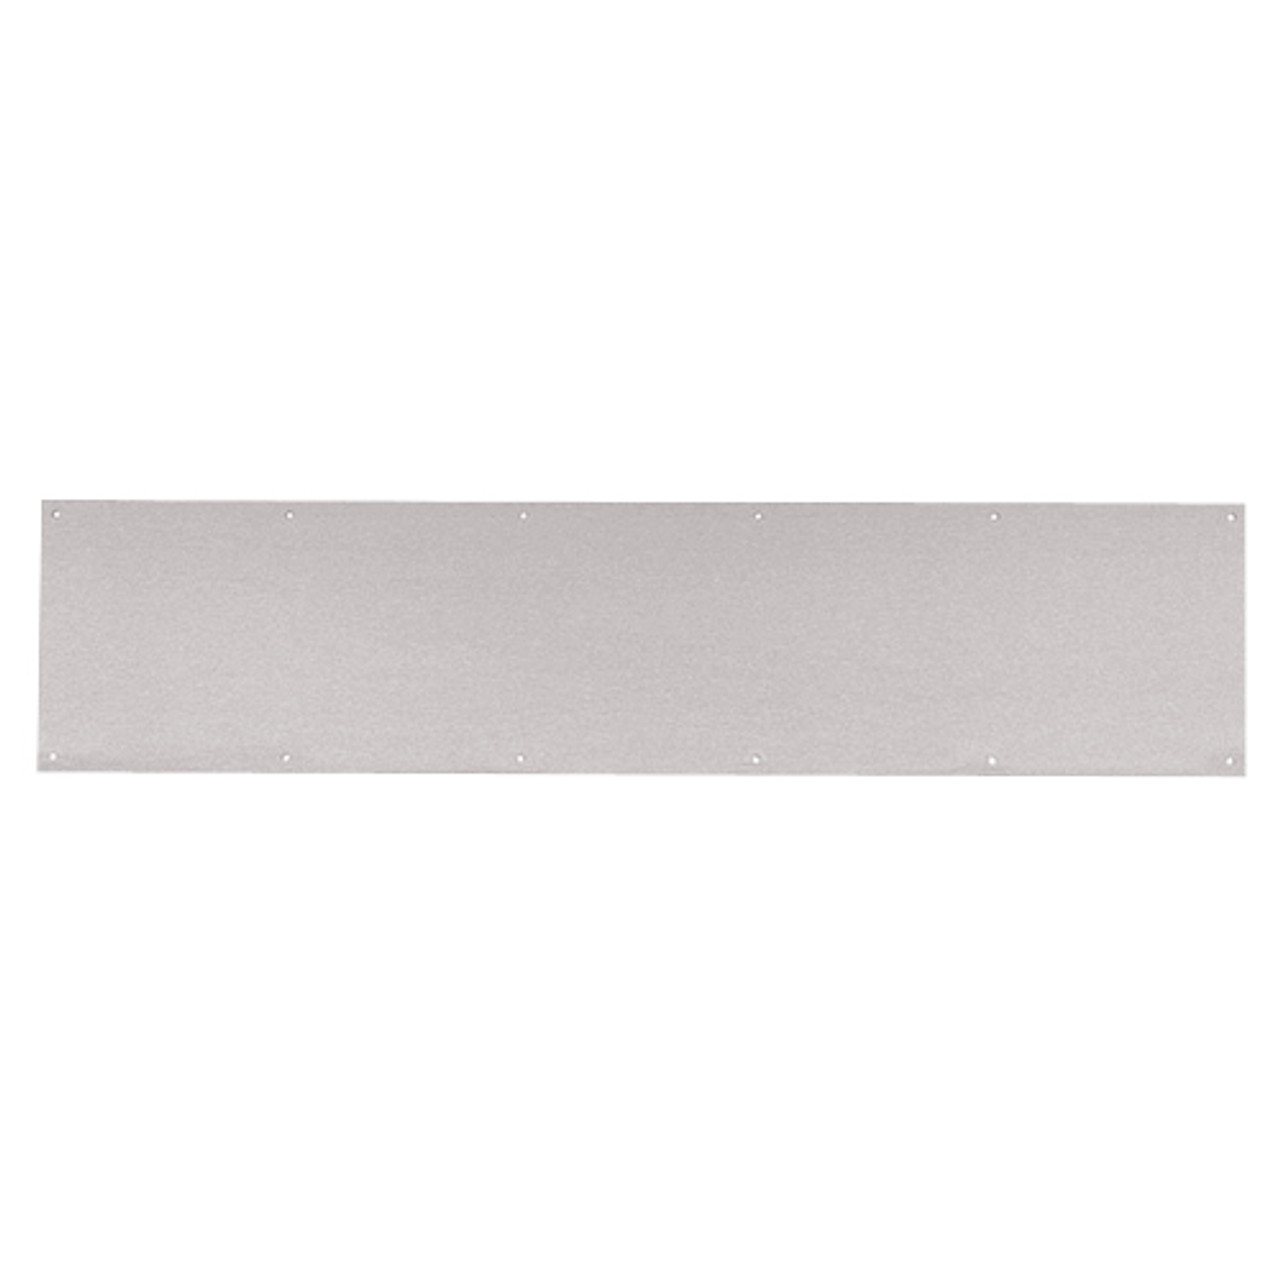 8400-US32D-4x31-B-CS Ives 8400 Series Protection Plate in Satin Stainless Steel